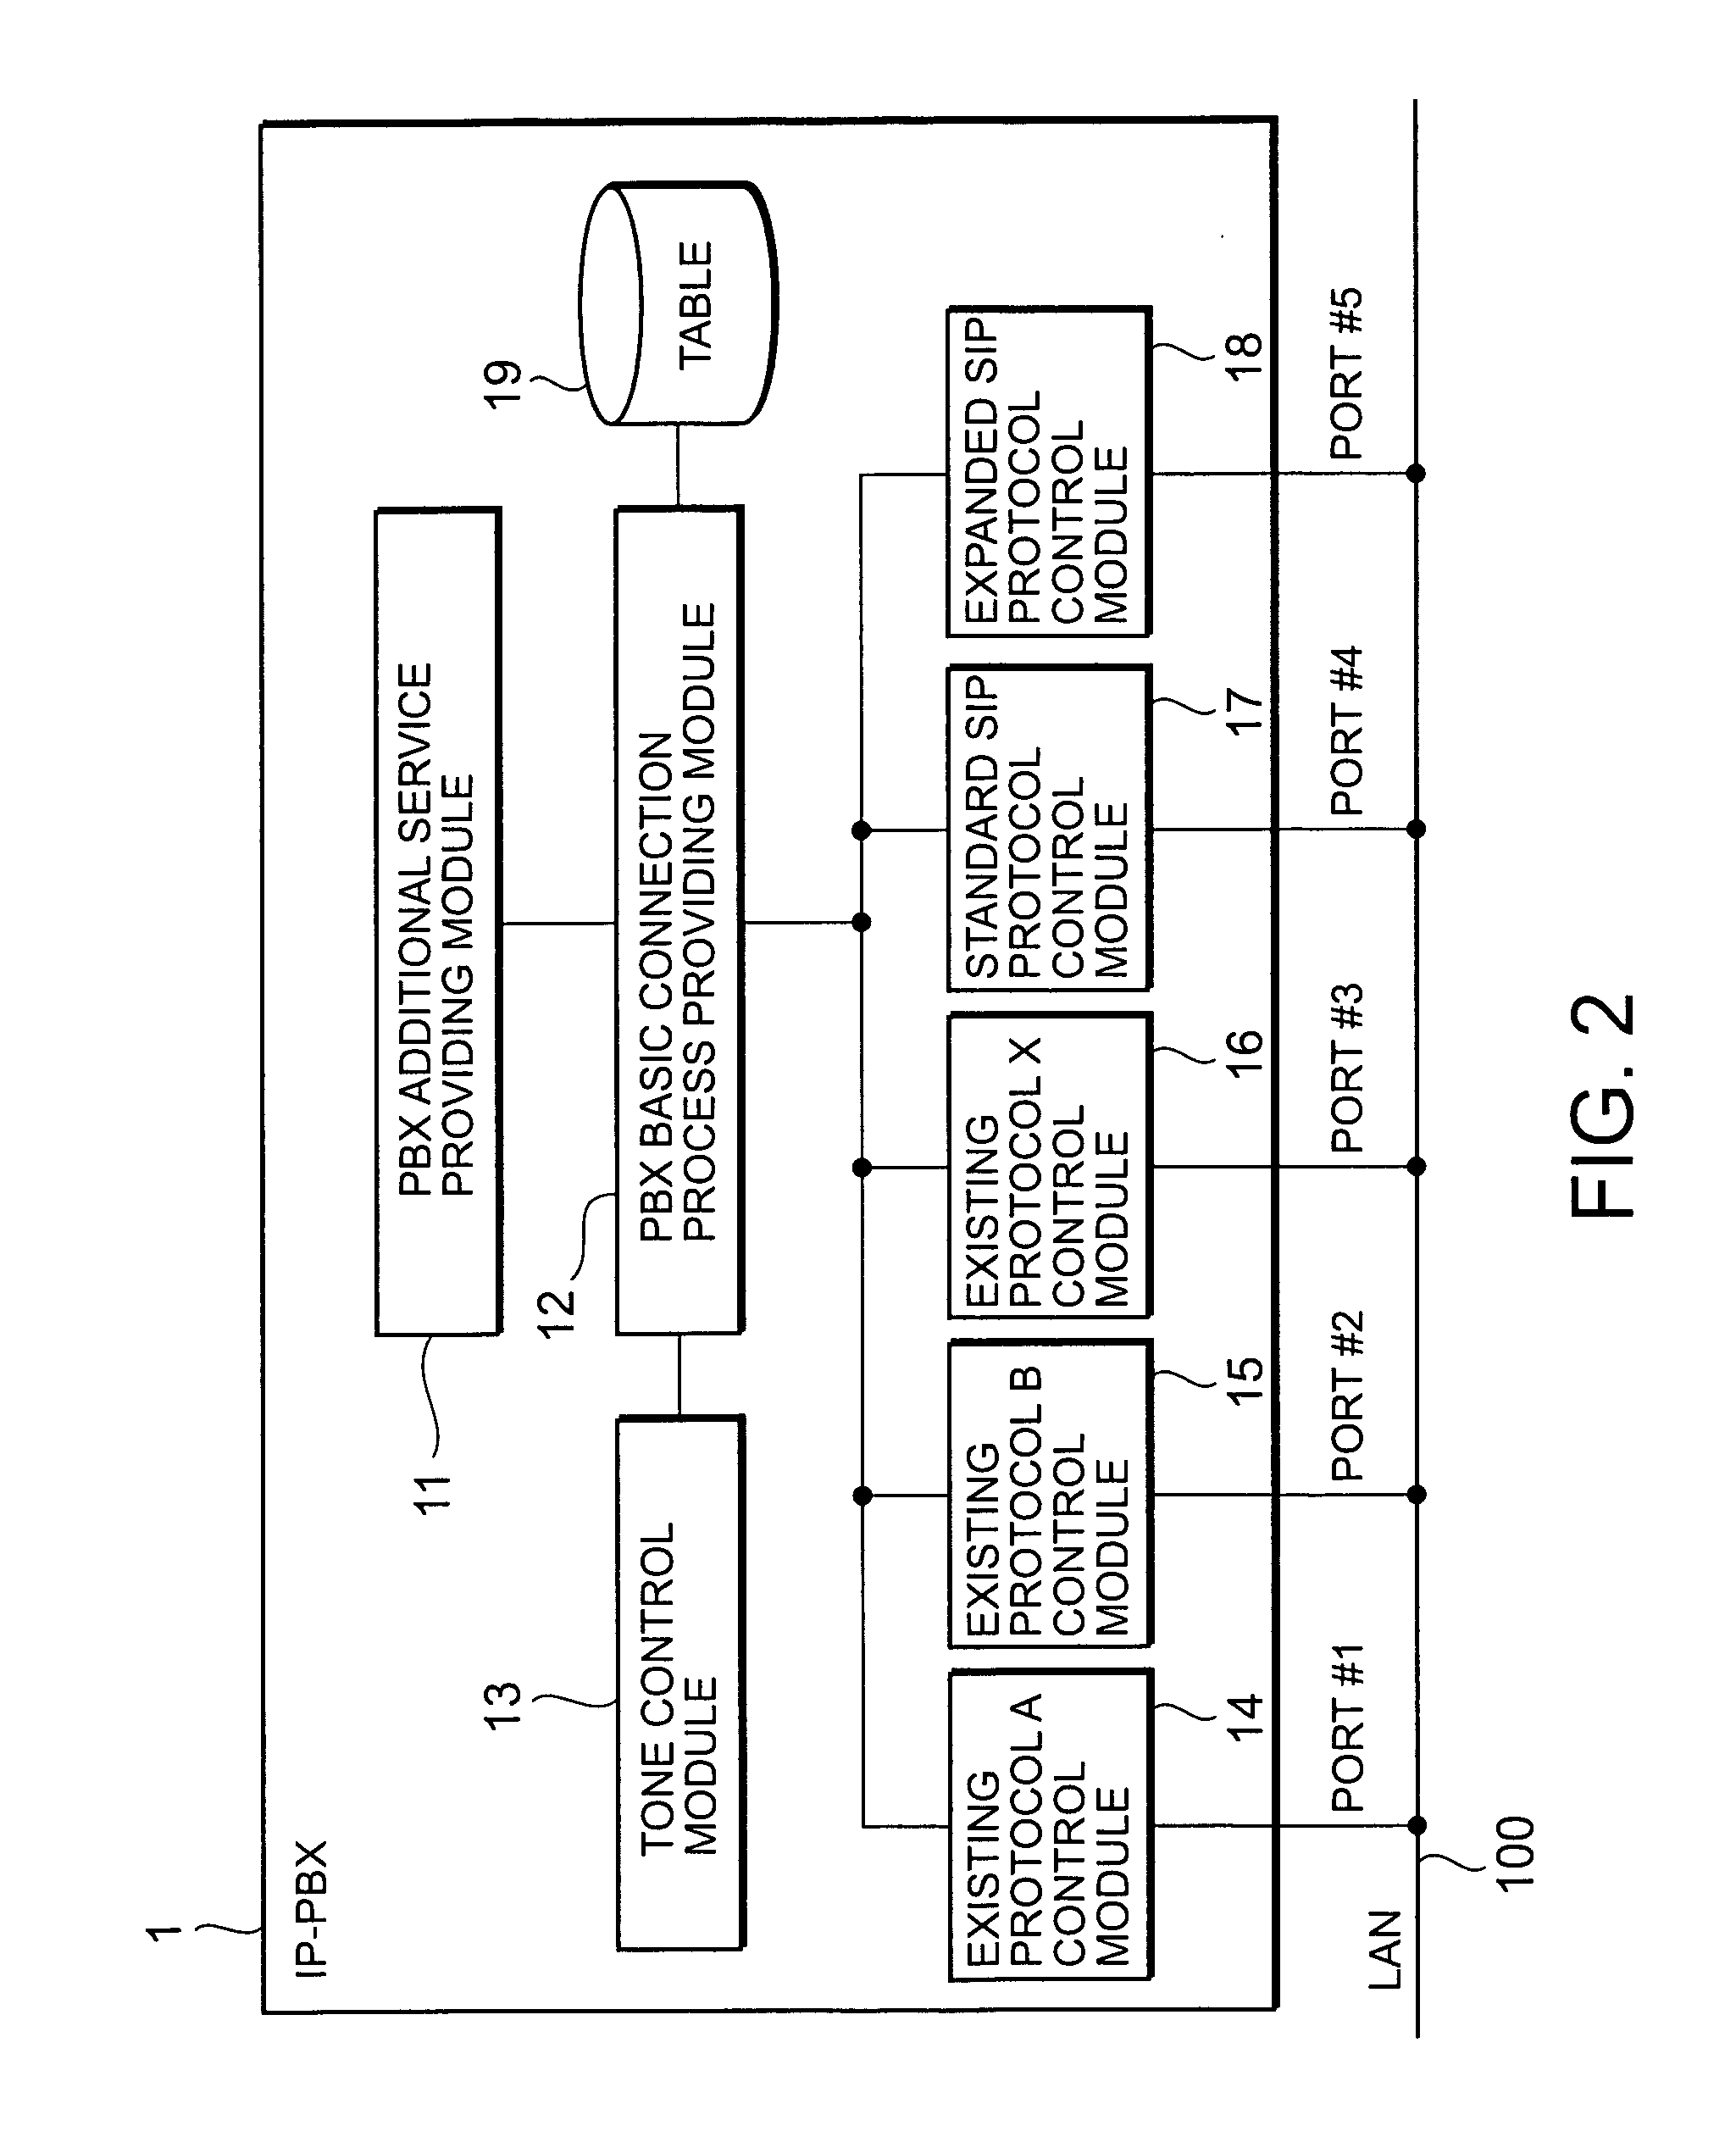 Network, private branch exchange, and PBX additional service starting method